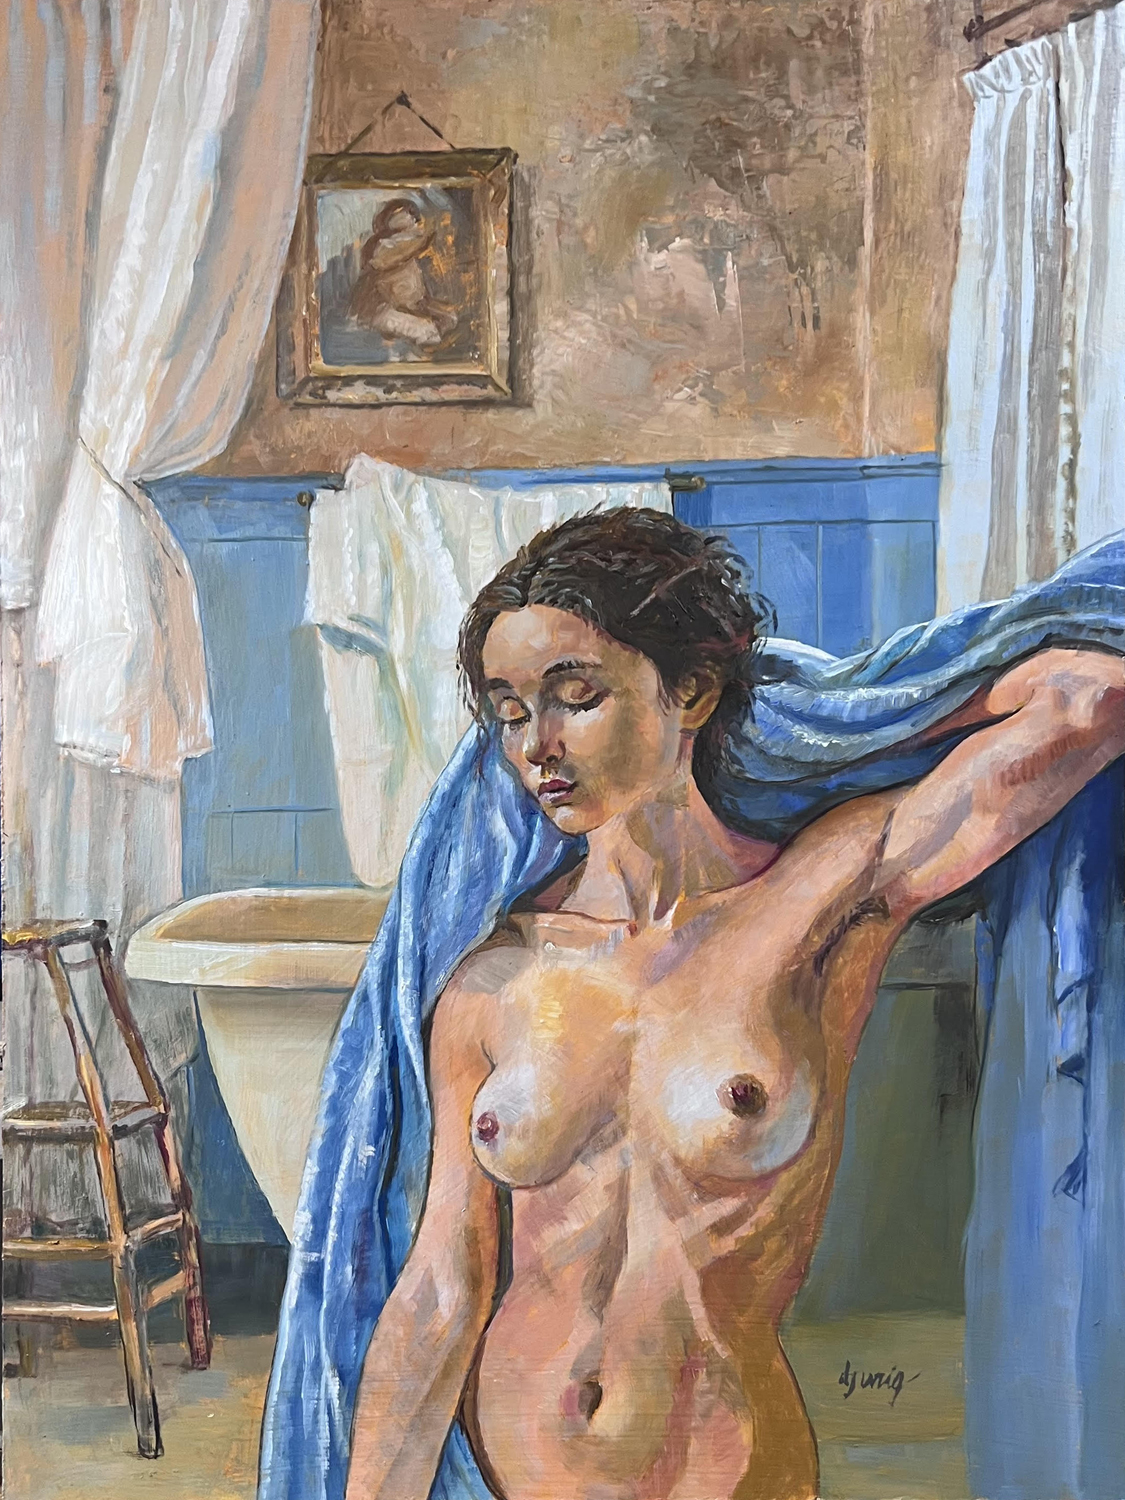 Two Women Bathing Oil Paintings and an Instructional Video